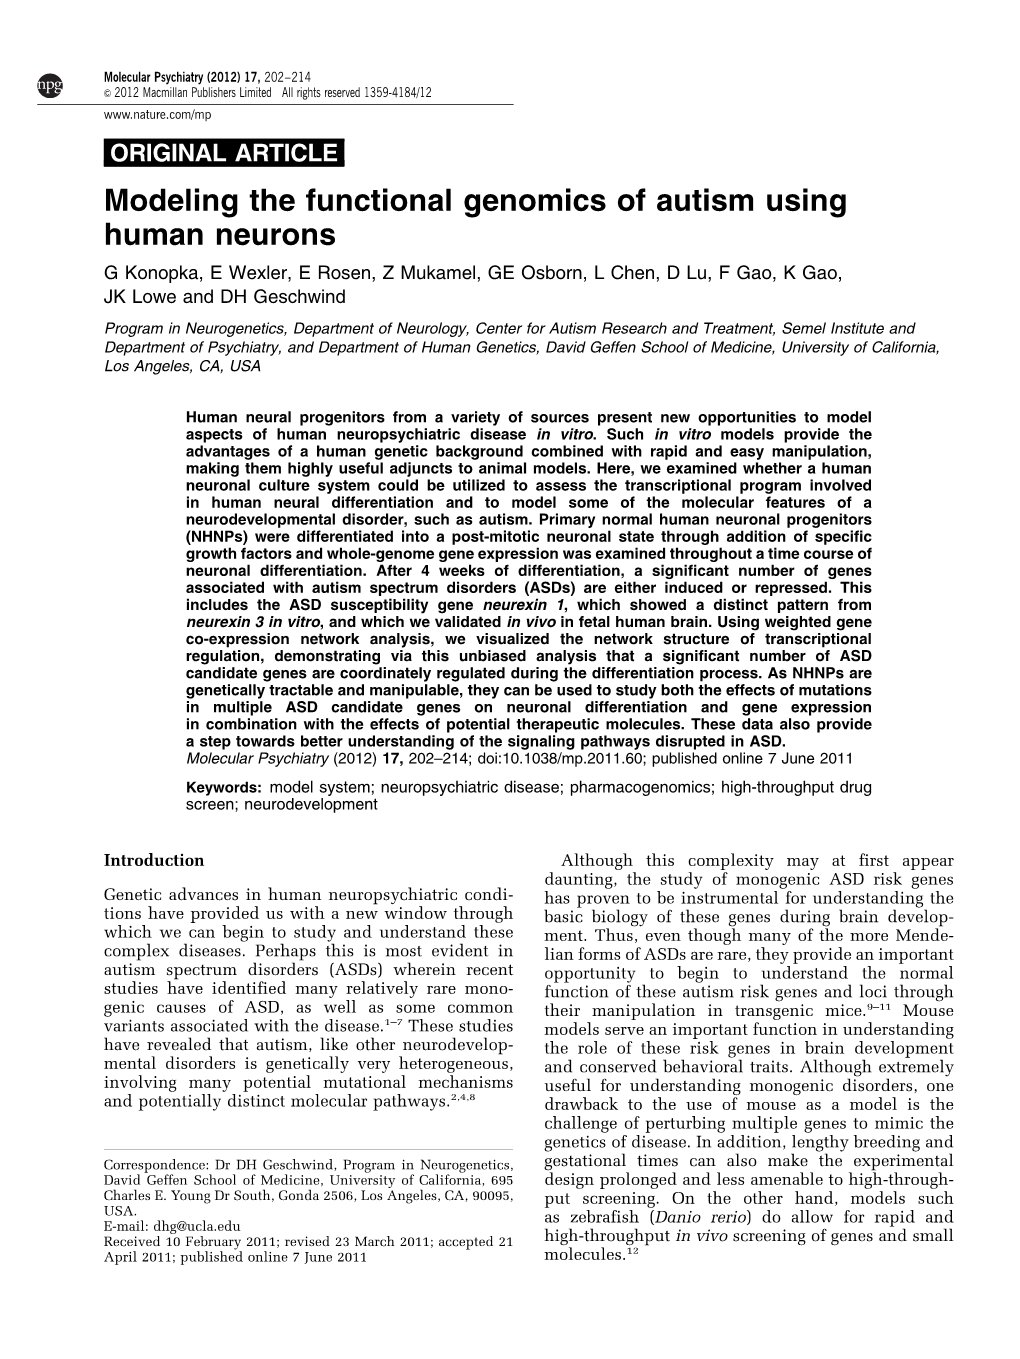 Modeling the Functional Genomics of Autism Using Human Neurons